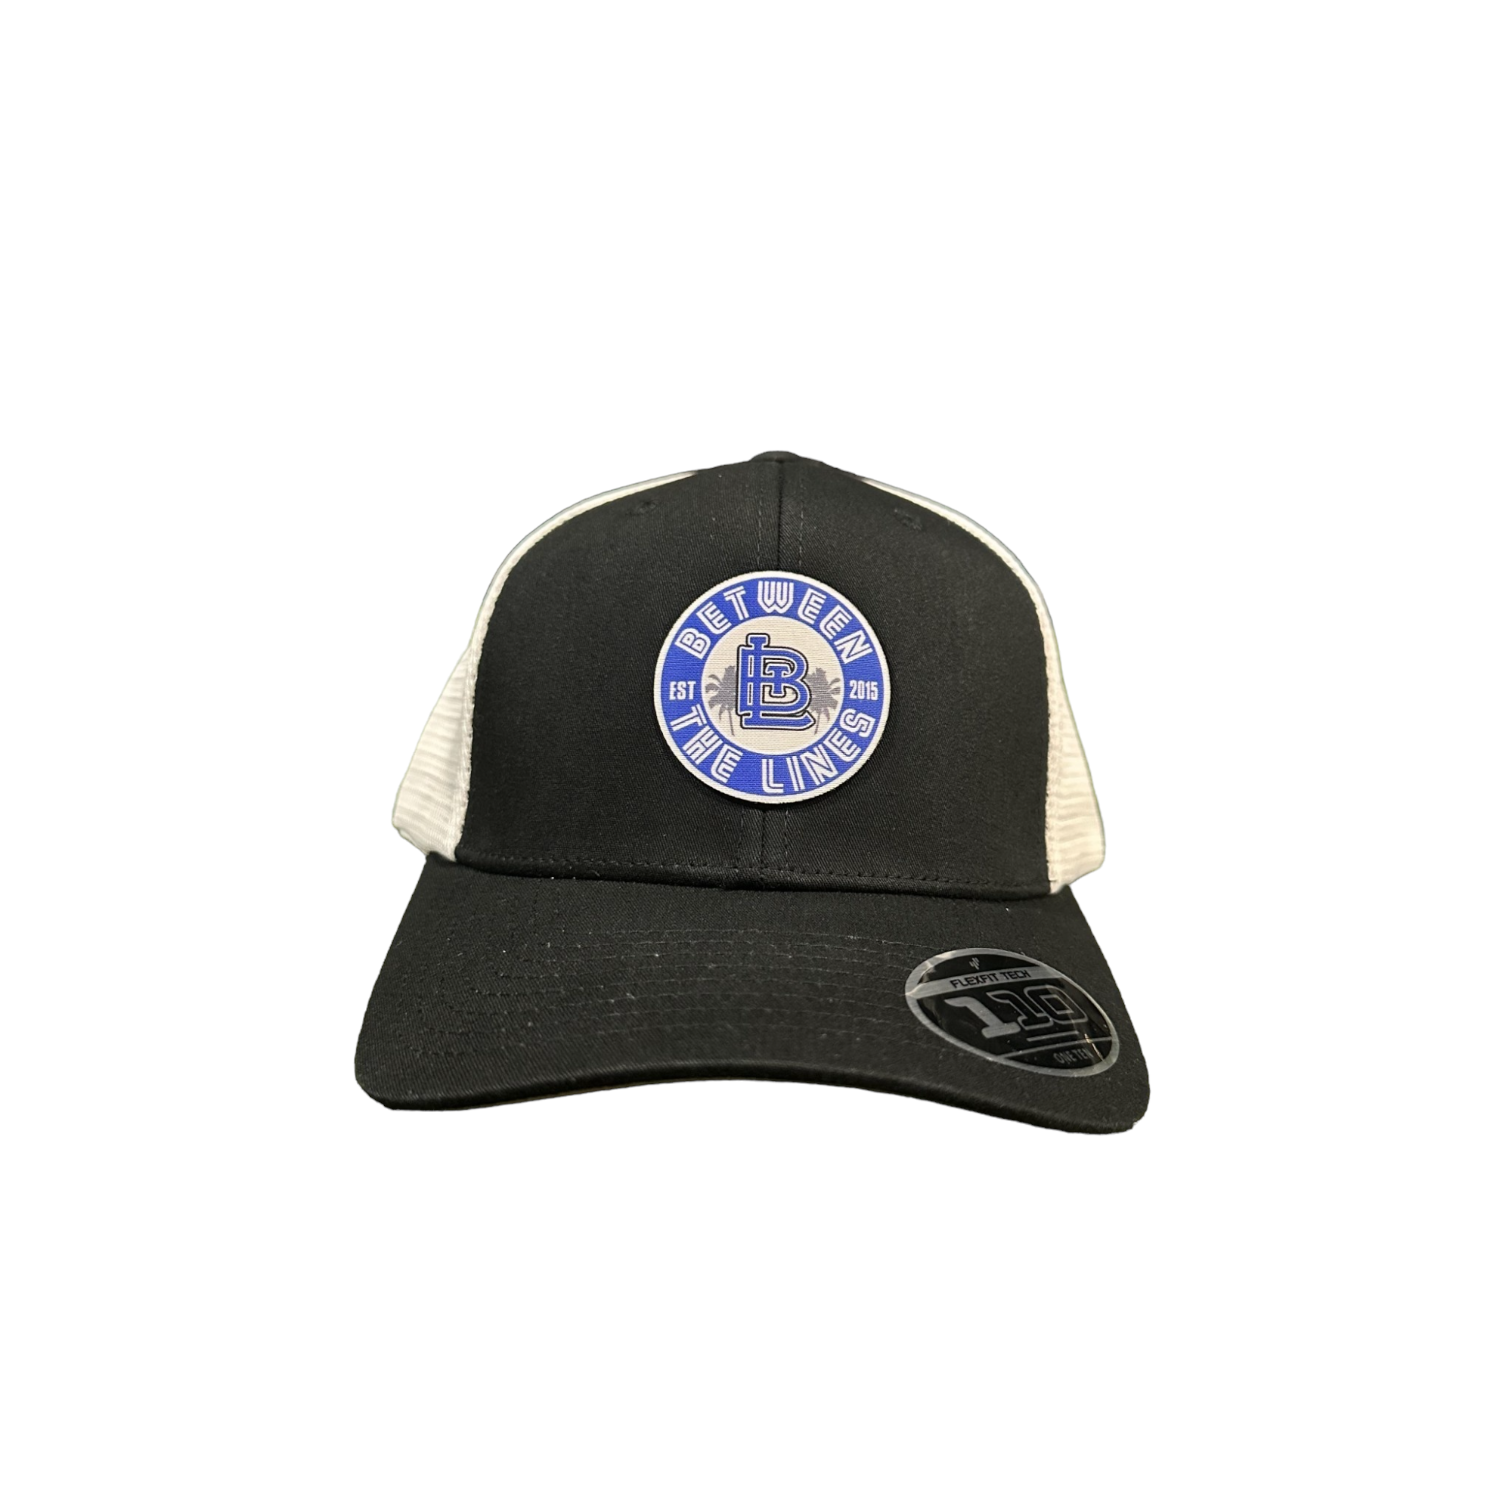 Between The Lines  Black/White  Trucker Hat Palm Badge